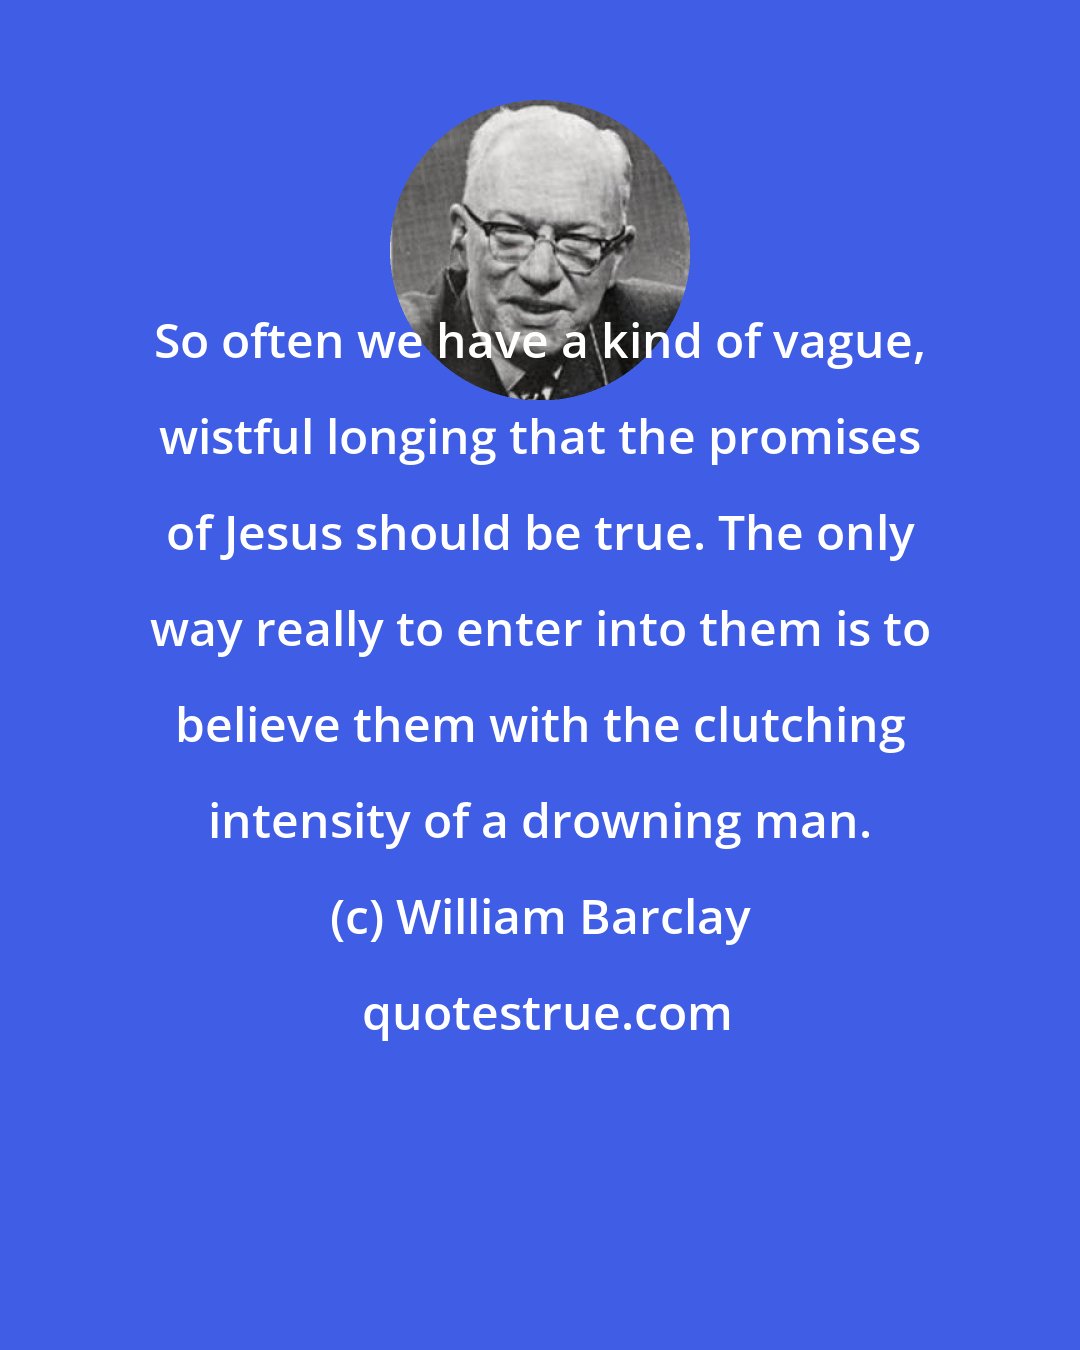 William Barclay: So often we have a kind of vague, wistful longing that the promises of Jesus should be true. The only way really to enter into them is to believe them with the clutching intensity of a drowning man.